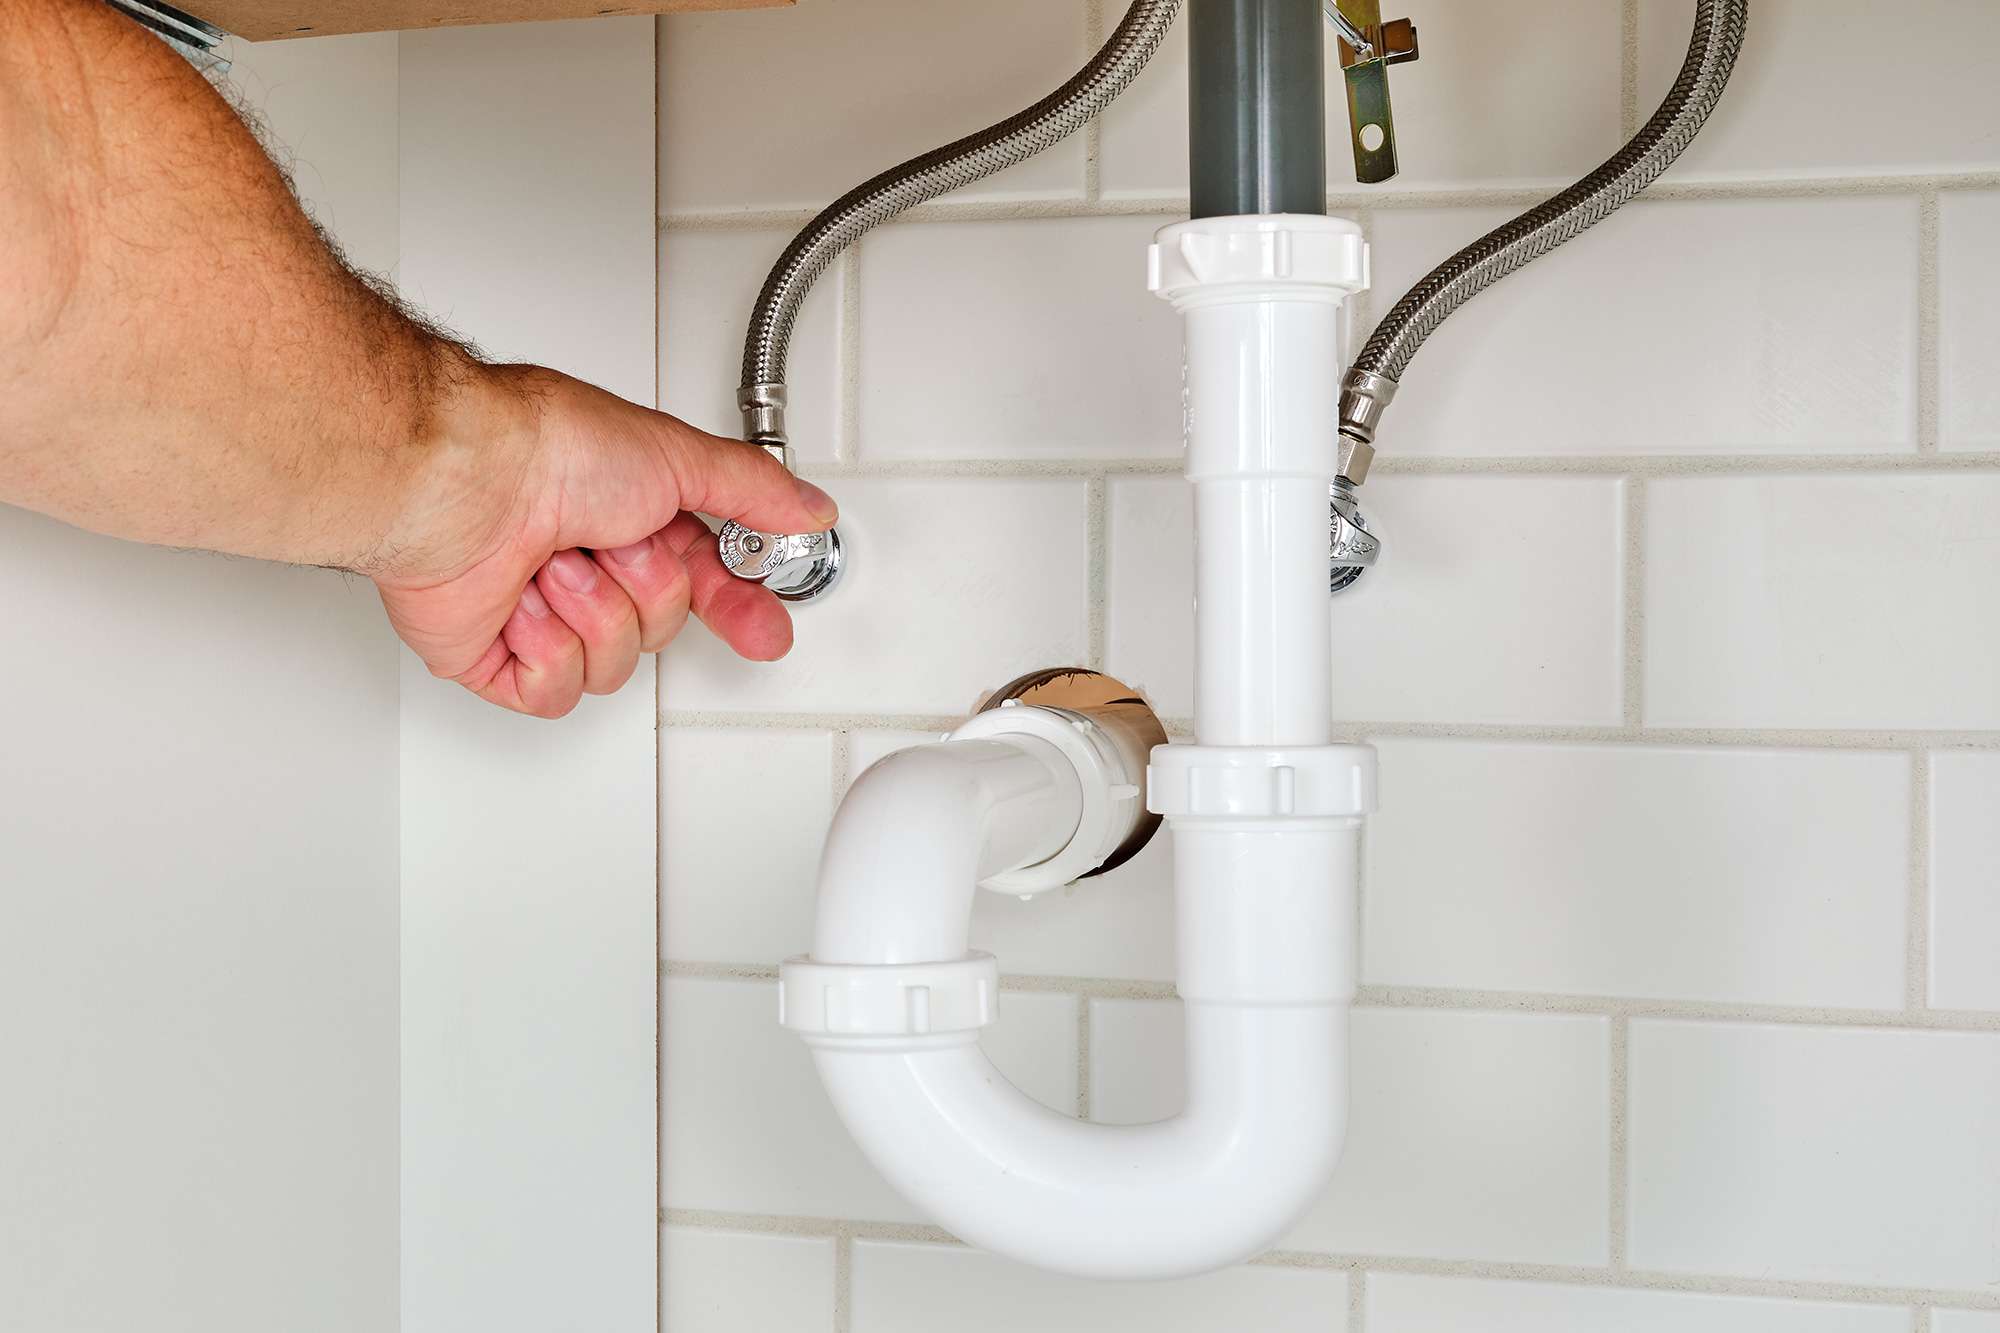 How do you fix a leaking plastic shut-off valve?